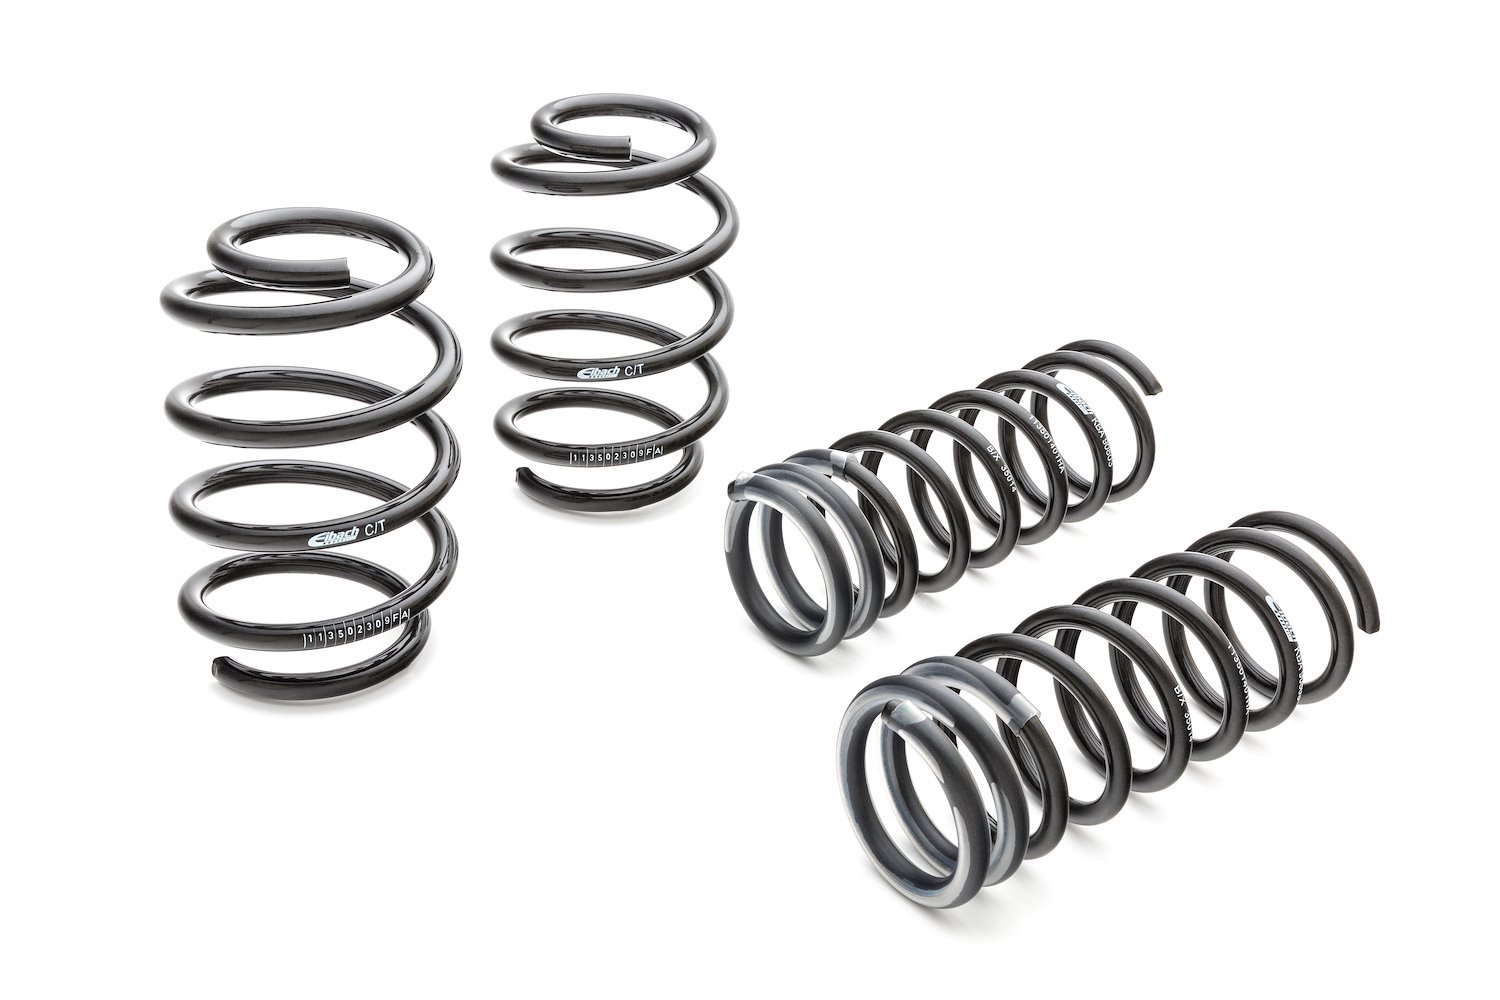 2876.140 Pro-Kit Lowering Springs 2006-2010 Charger V6 - 1.400 in. Front/1.700 in. Rear Drop